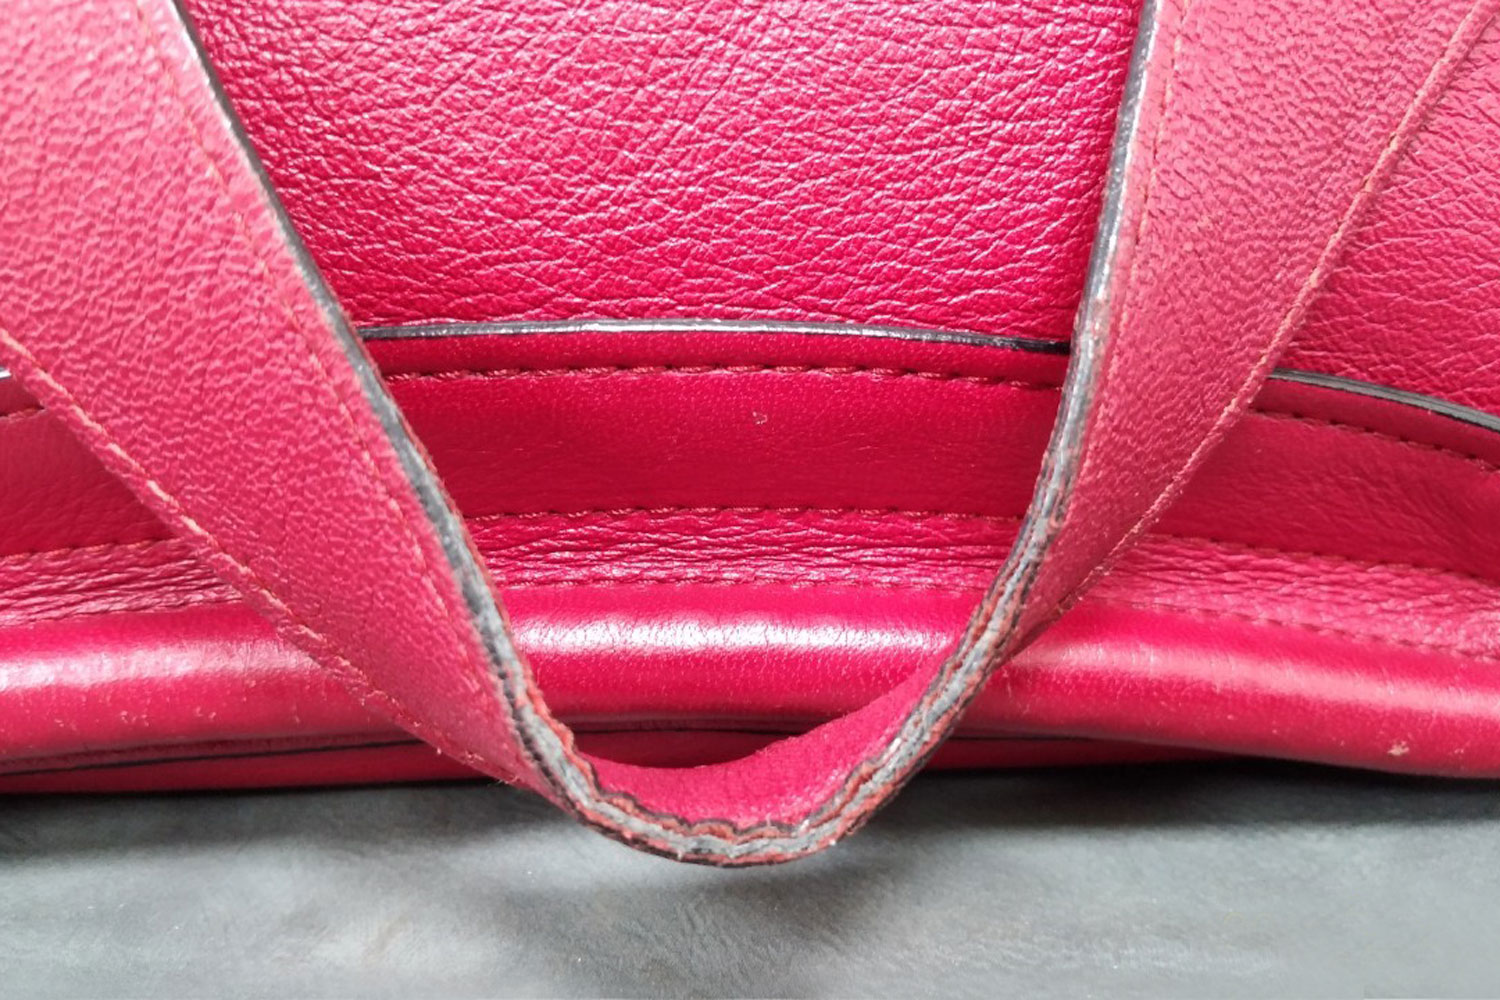 TIPS&TRICKS] Leather Edge Paint Peeling: What to do?